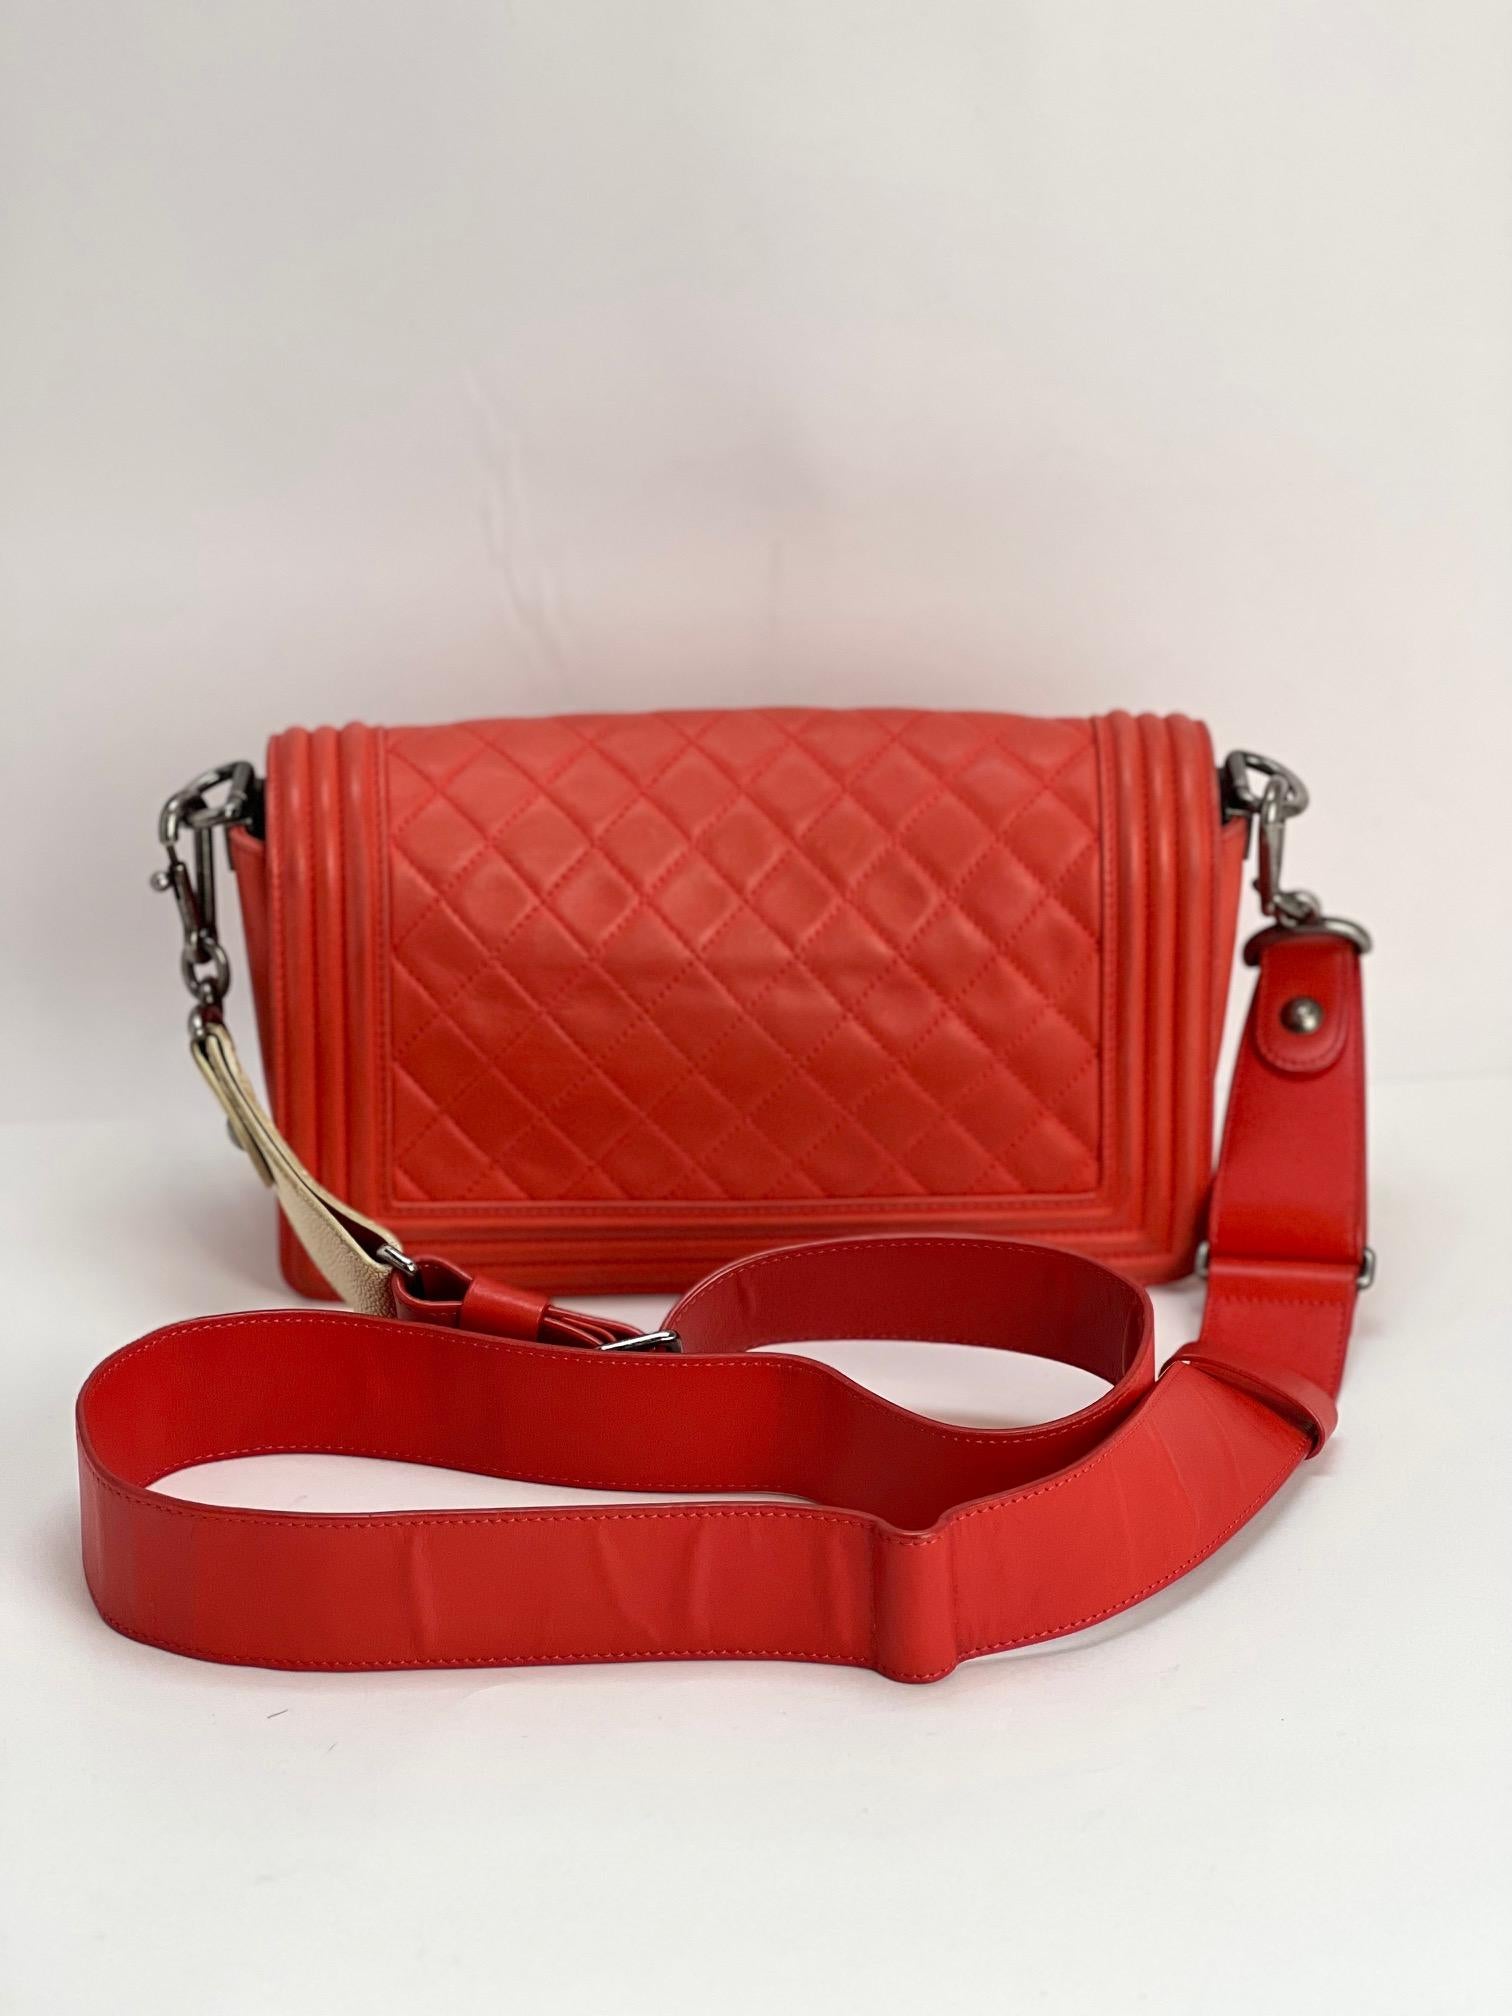 CHANEL Lambskin Quilted Medium Boy Red Flap Bag For Sale 12